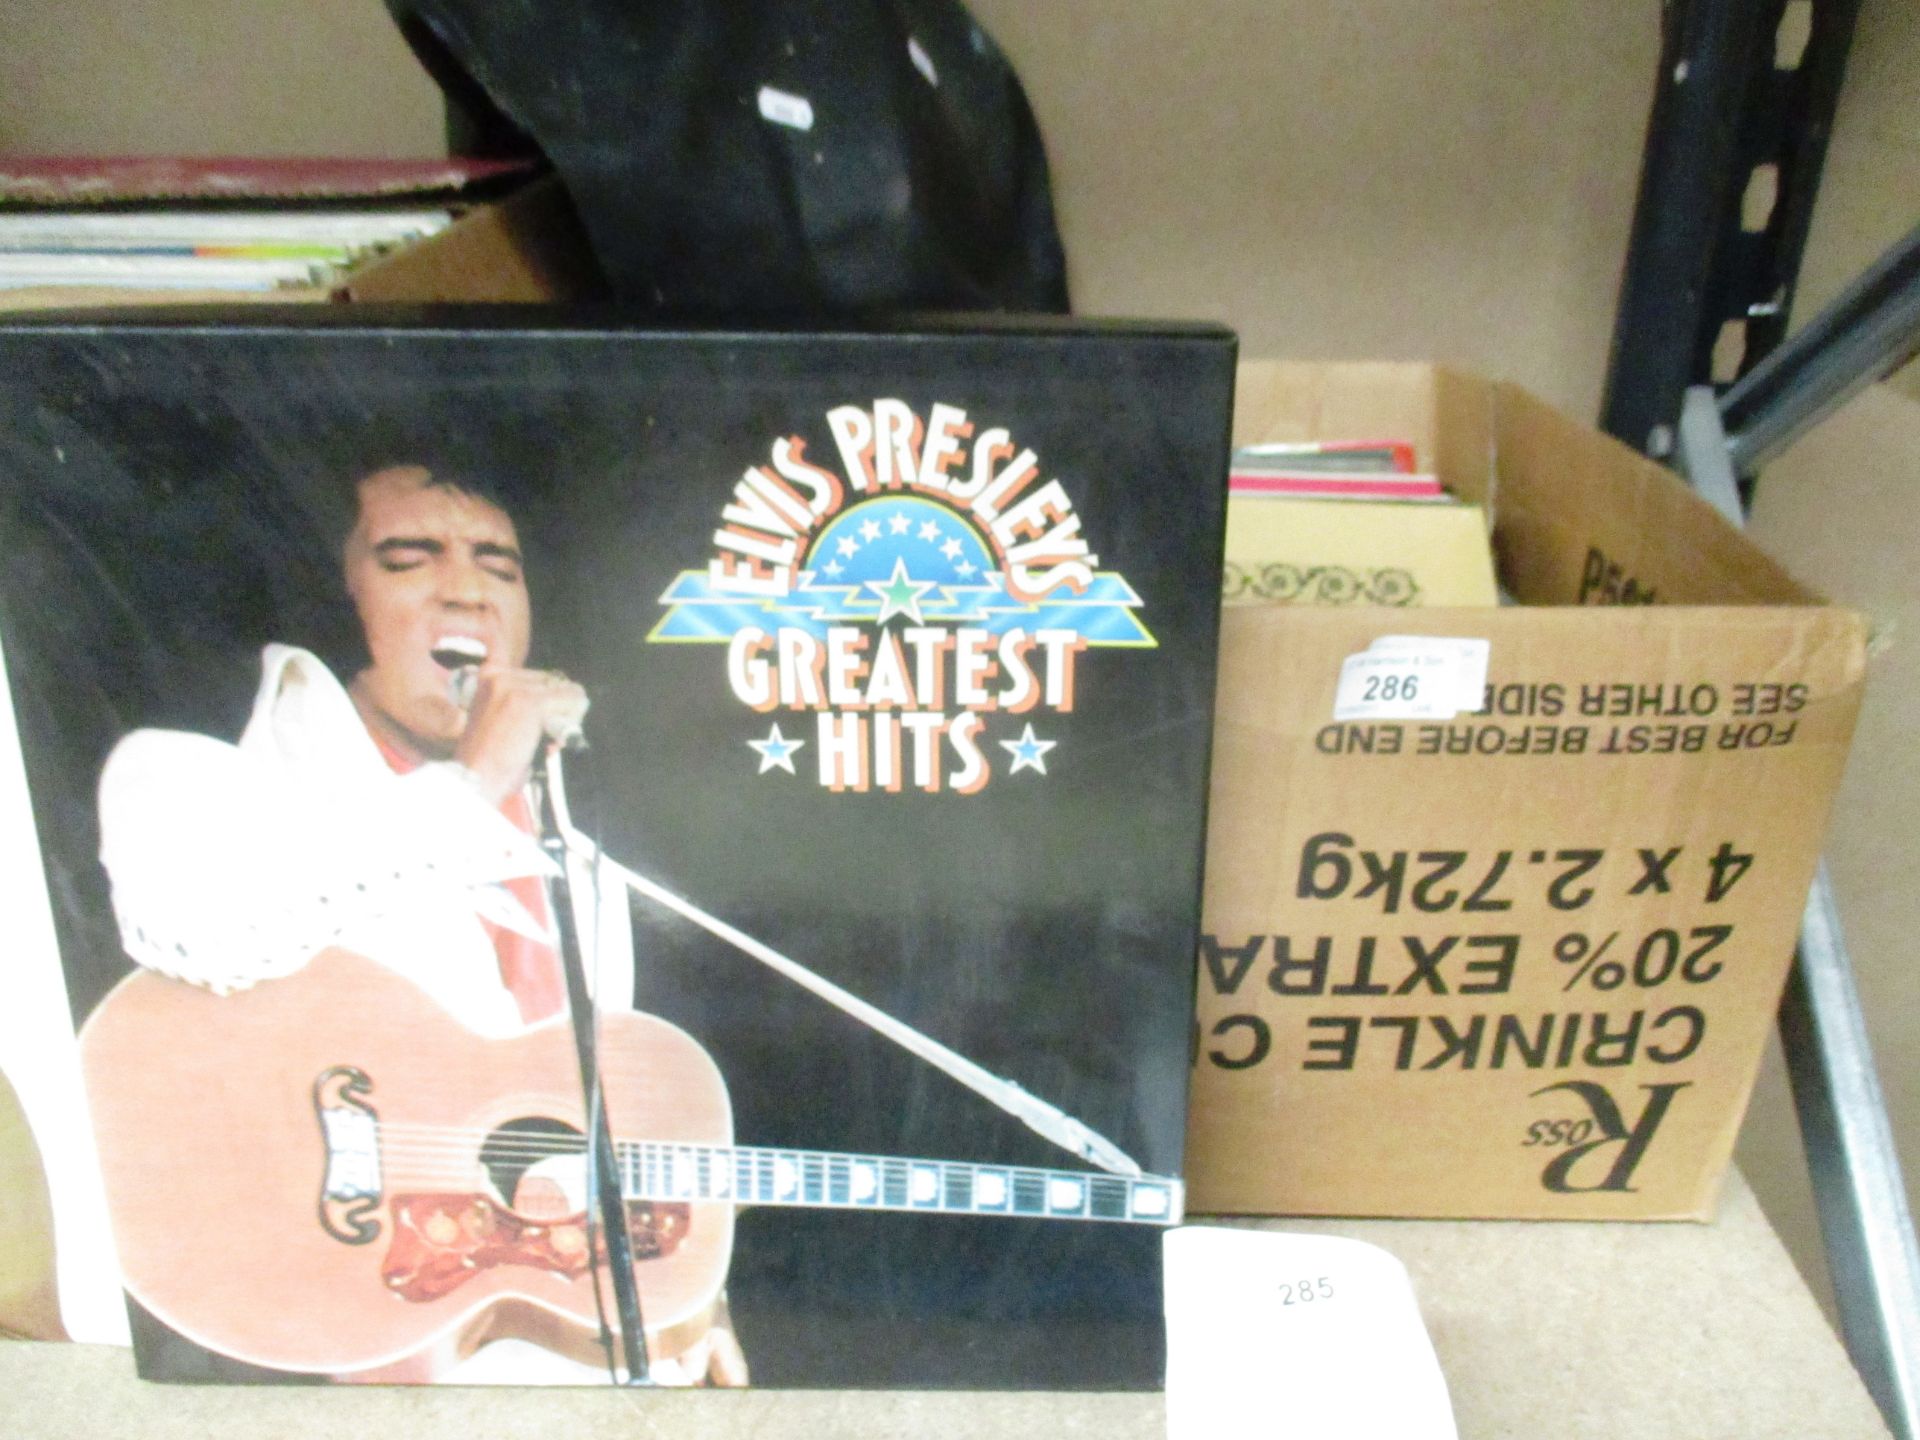 Elvis Presley 'Greatest Hits' box set and 15 other LP's - Sandpipers,